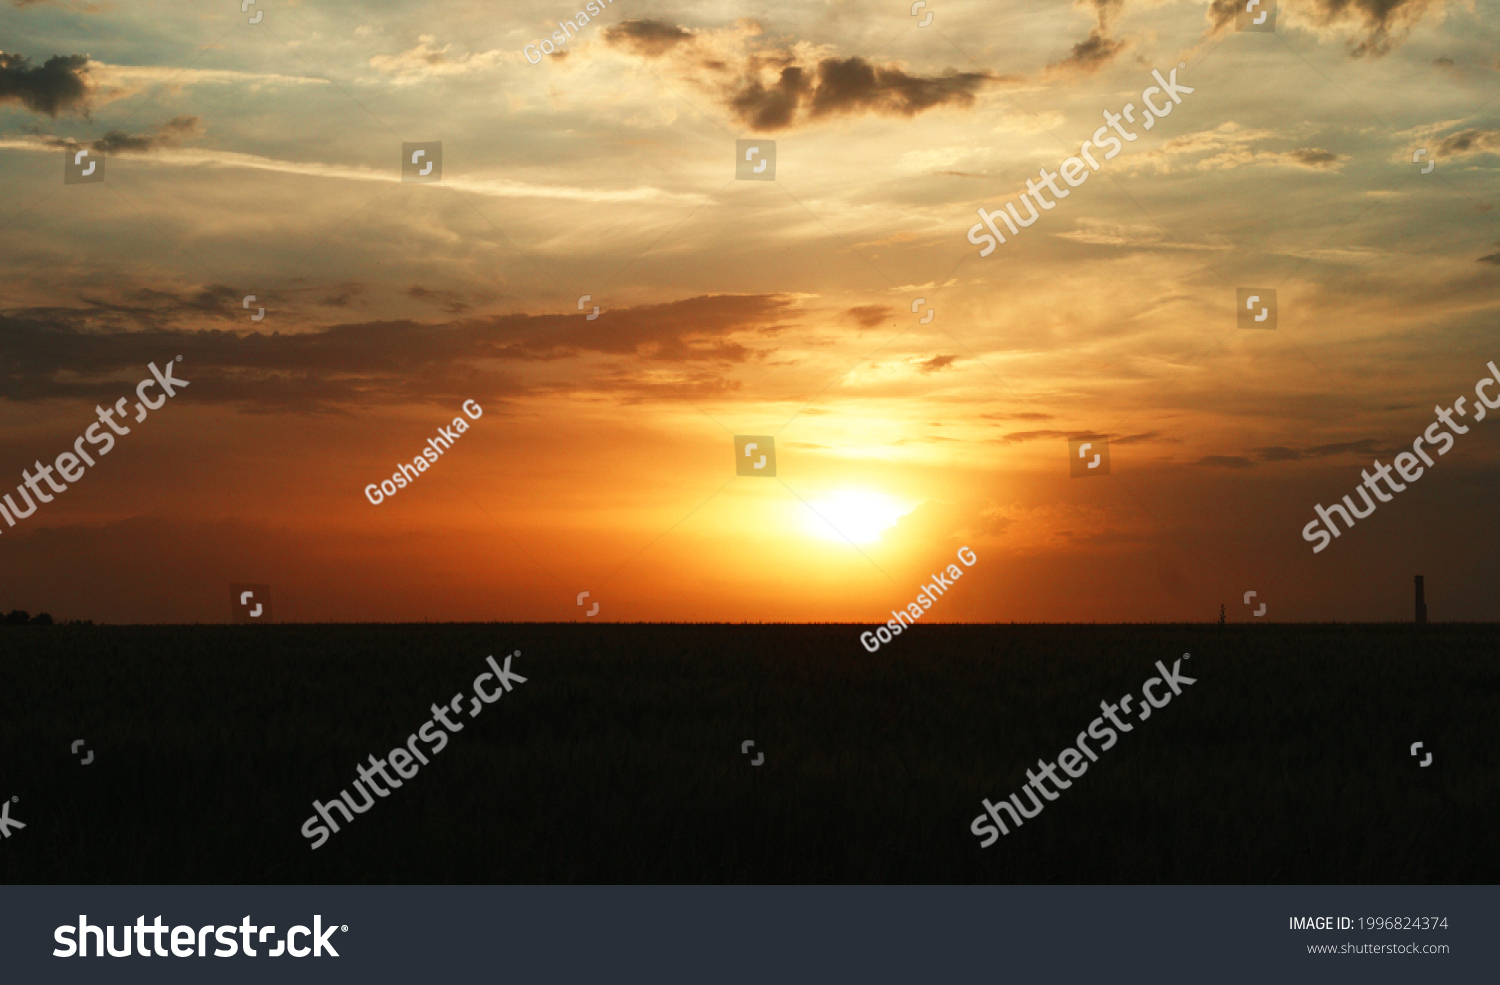 Dramatic sunset and sunrise sky with colorful and rainy clouds #1996824374